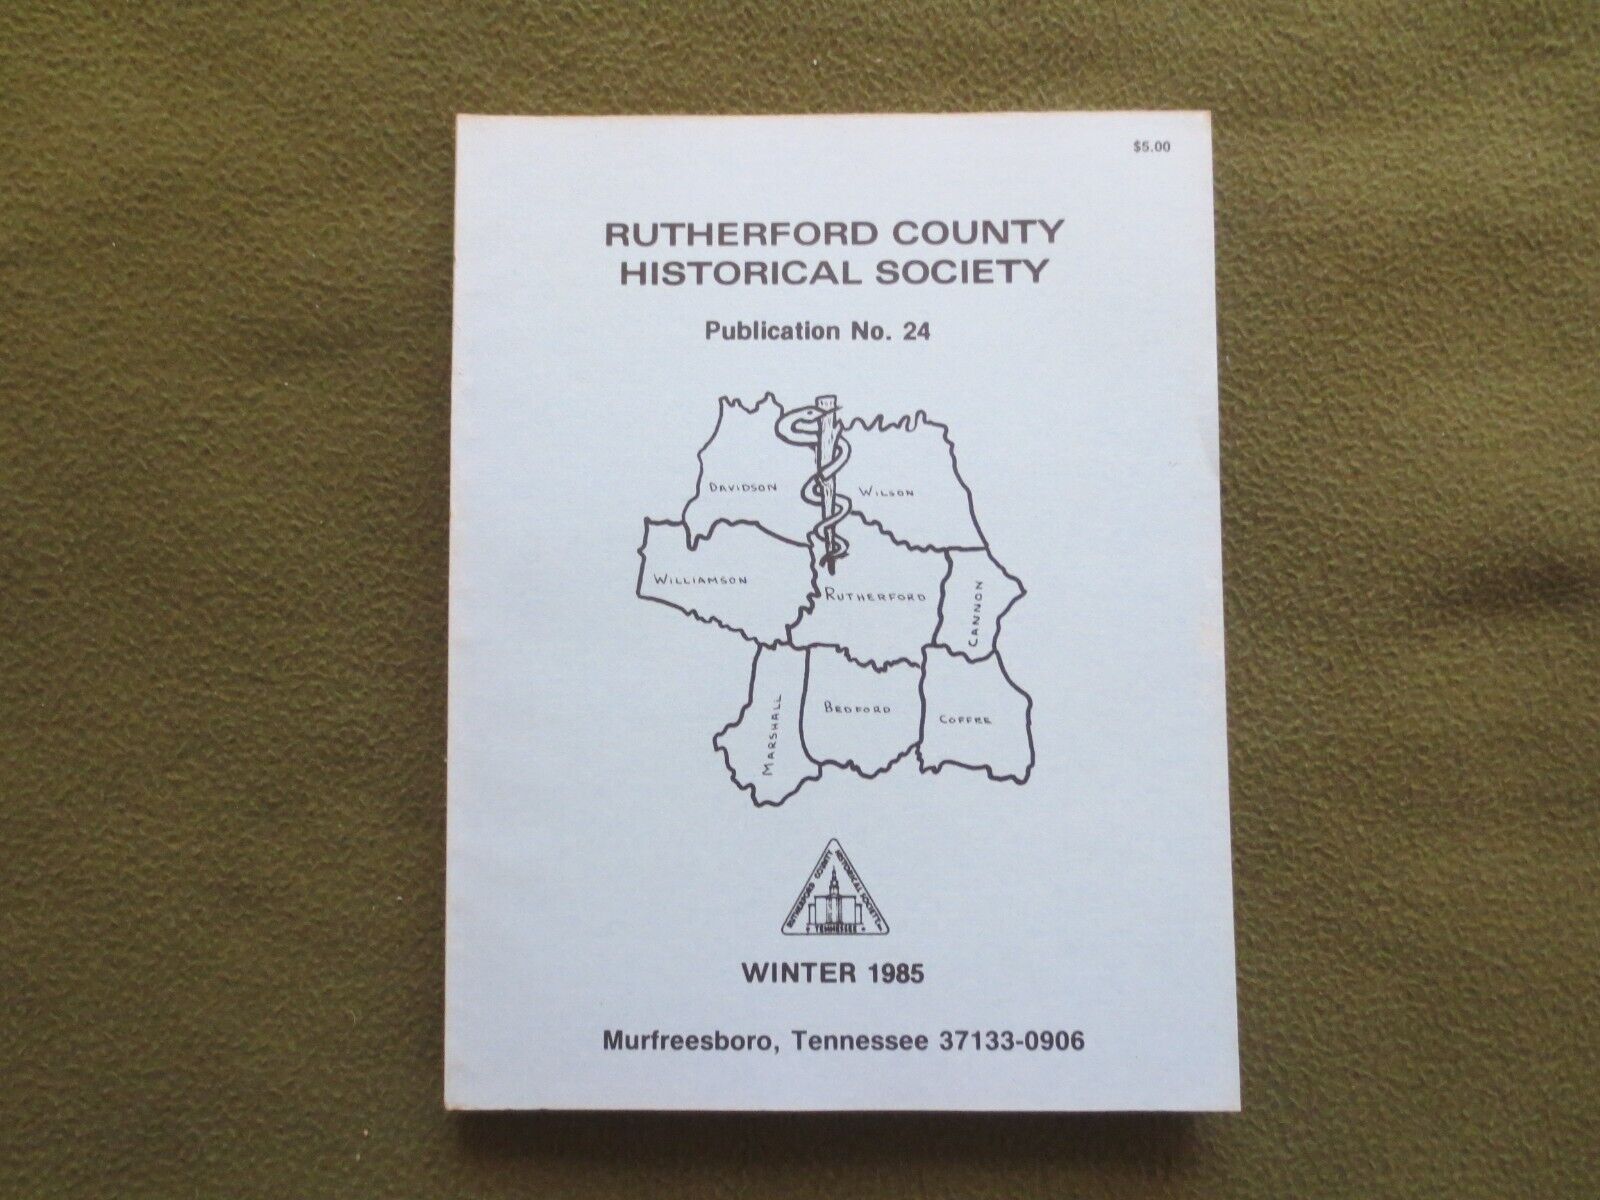 History of Medicine in Rutherford County Tennessee 1985 Part 1 Dr. Robert Ransom